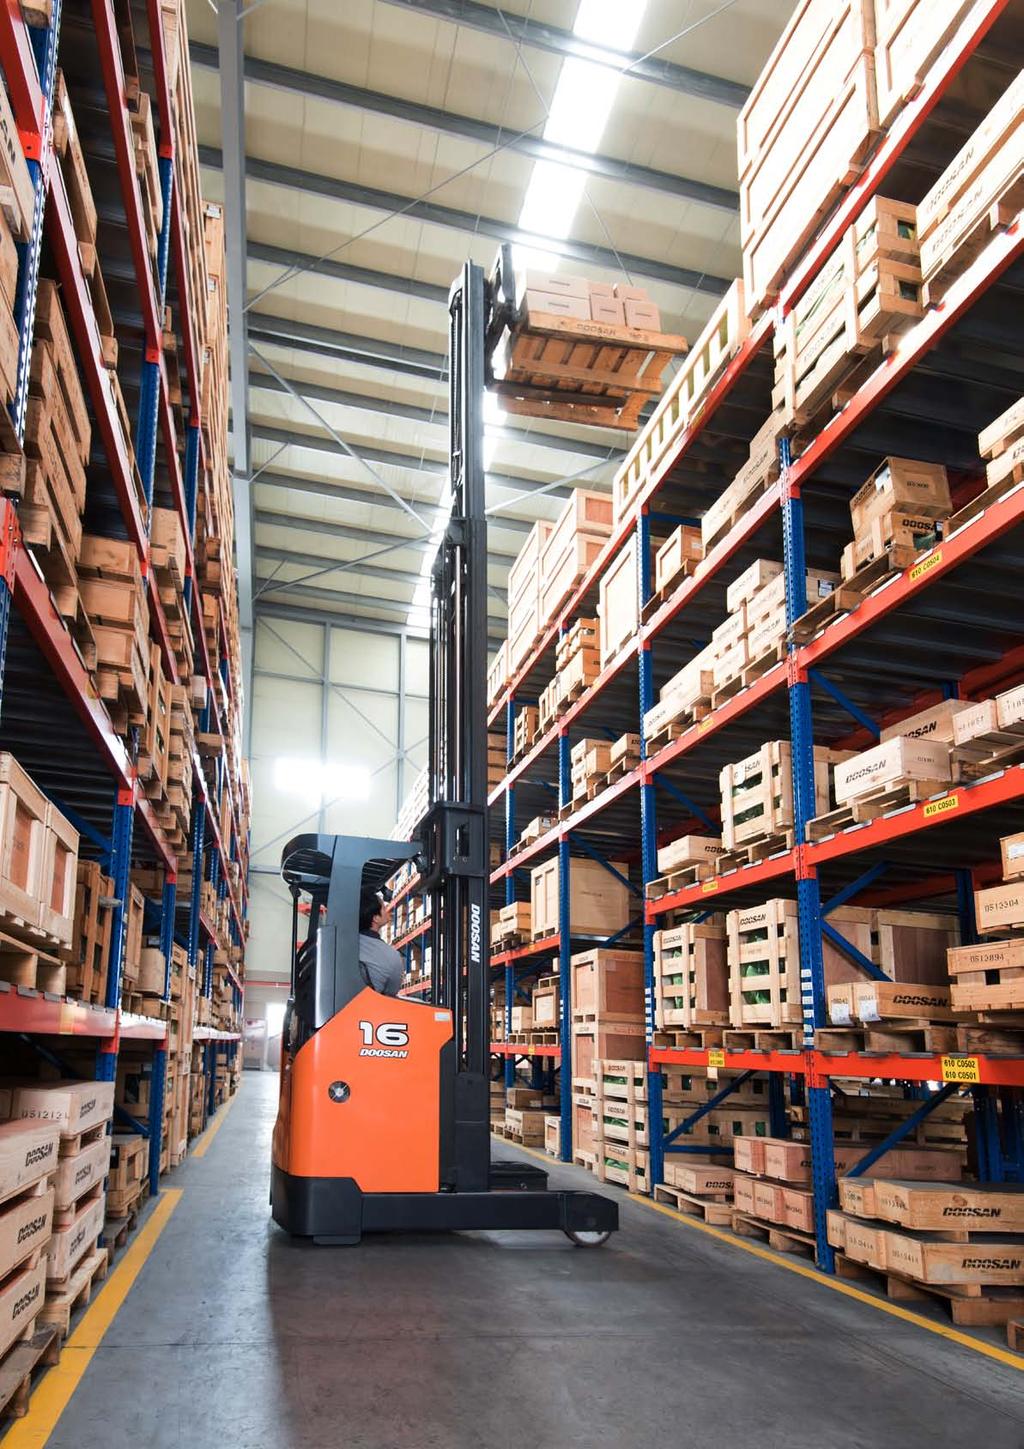 7 PULS Series Reach Truck productive. Doosan has designed the BR14/16JW-7 Plus to make even more precise, efficient movements in any warehouse application.